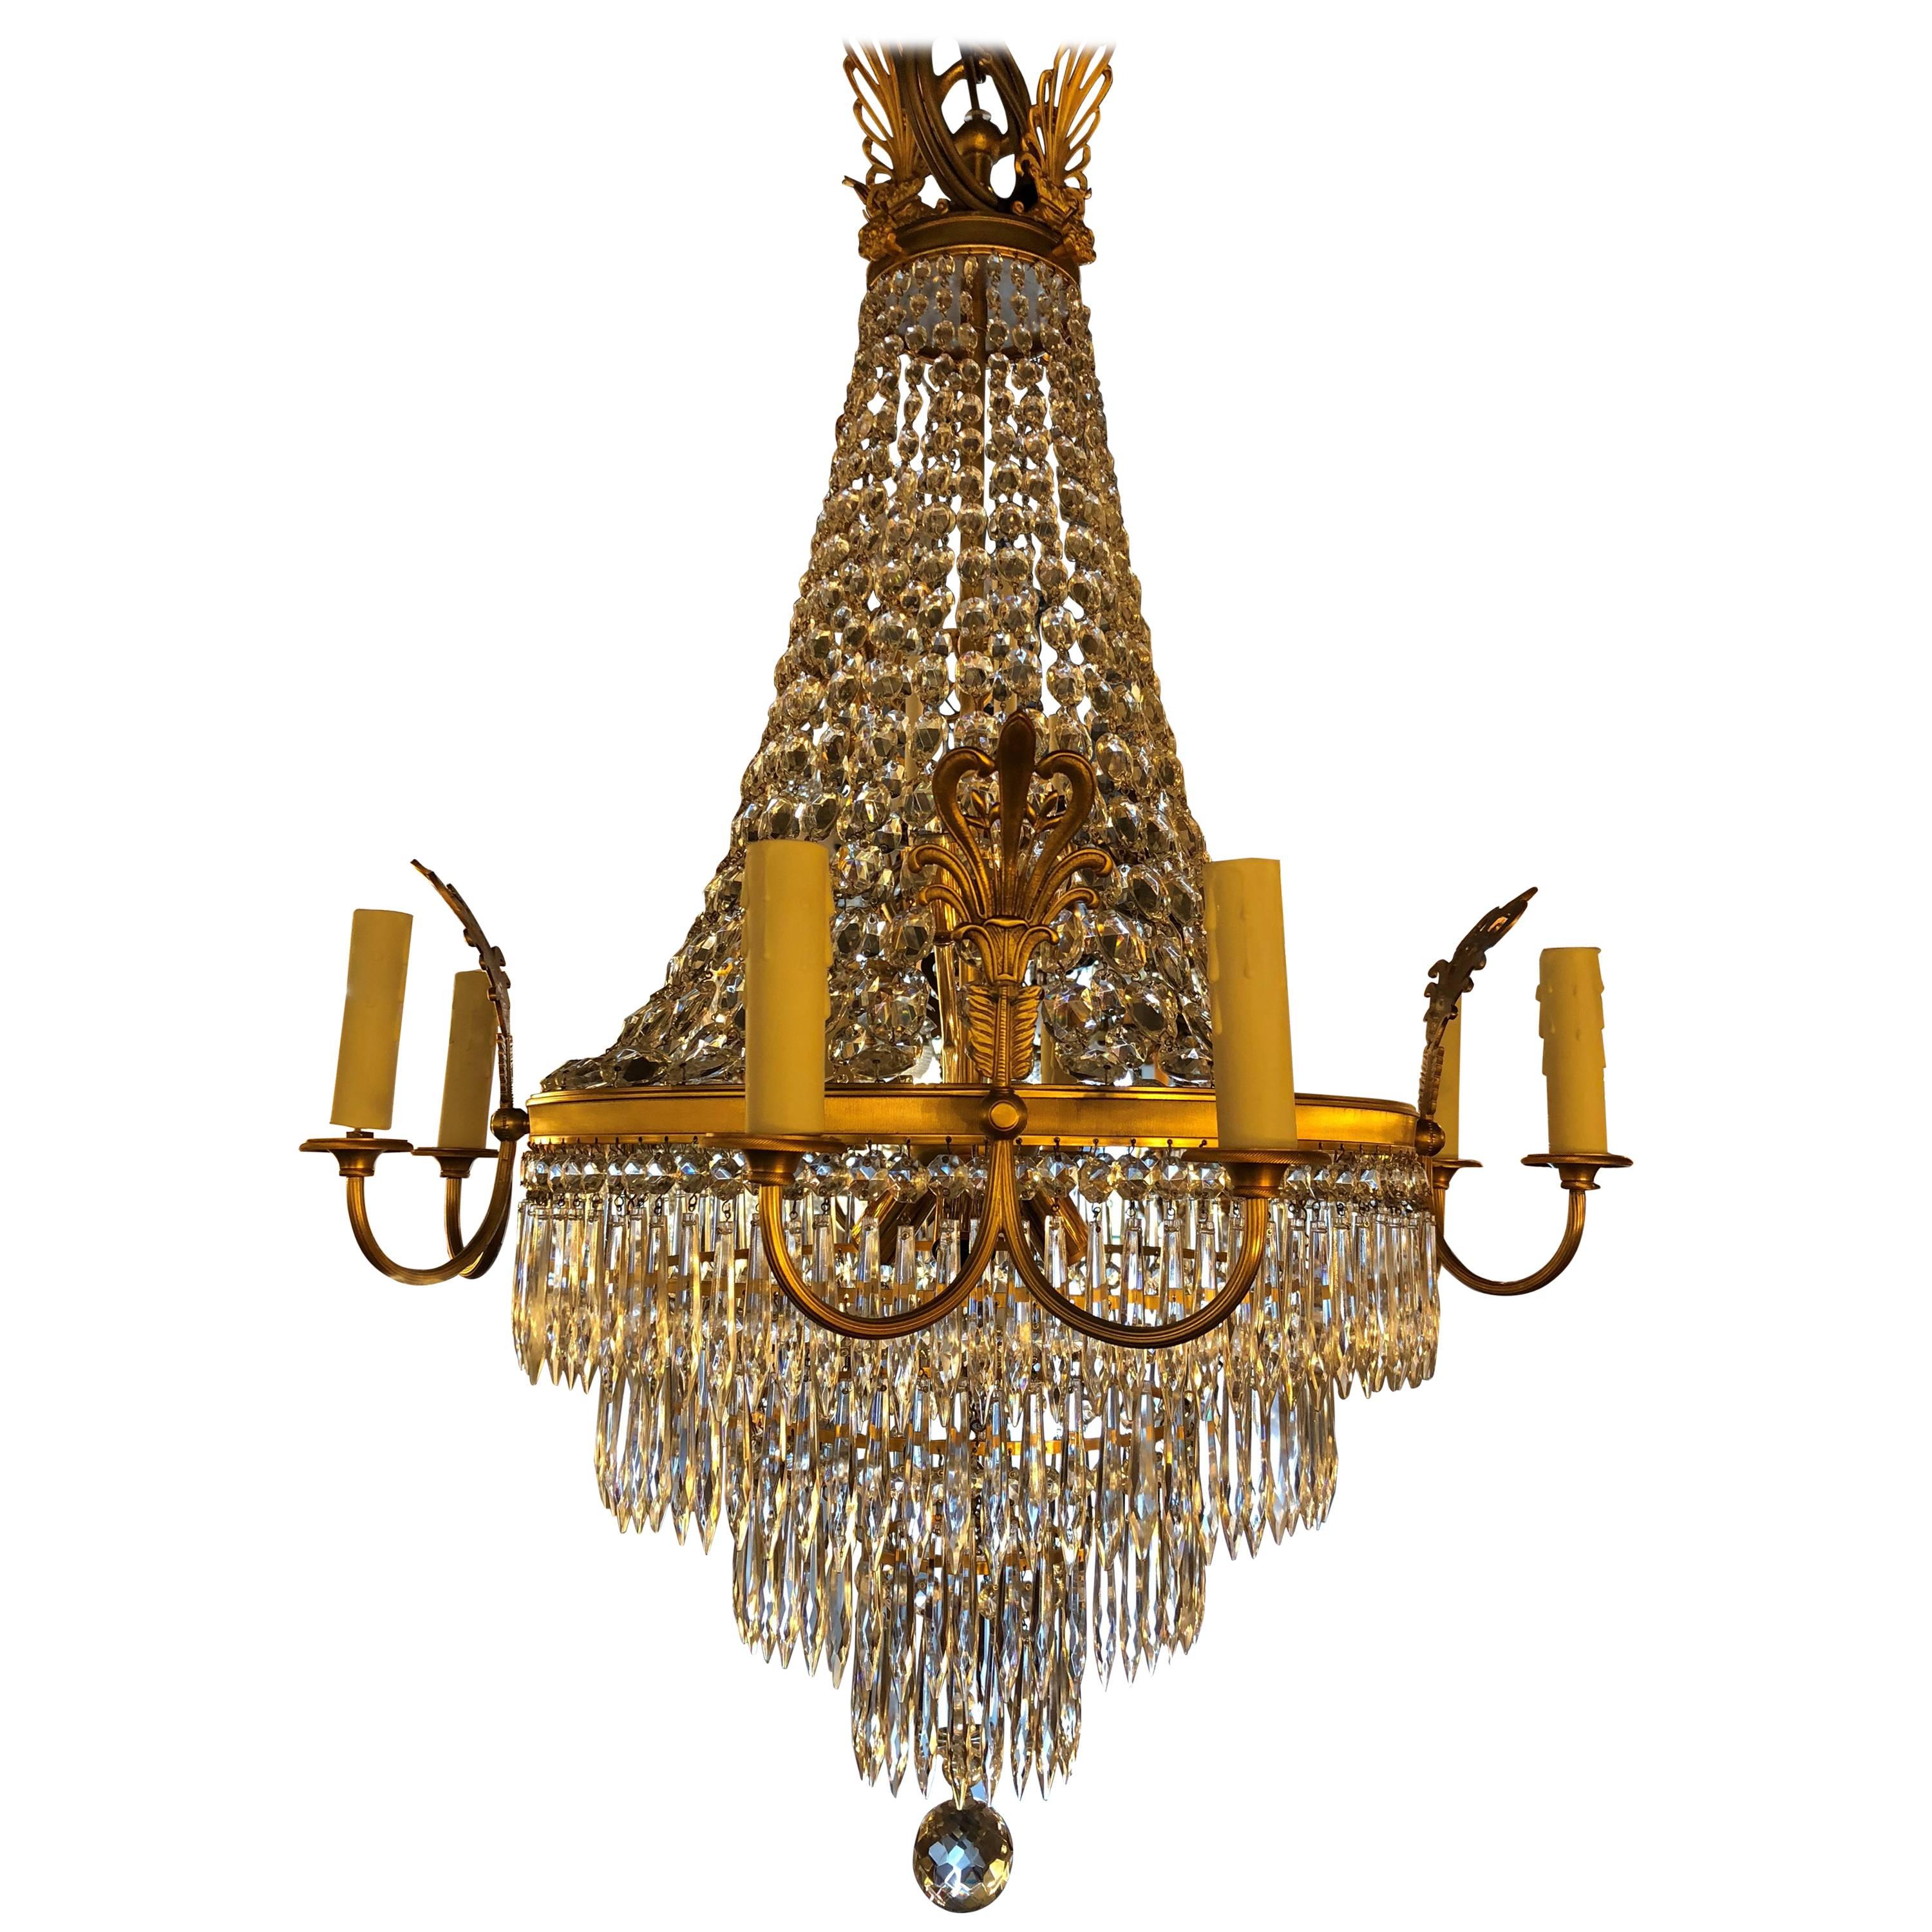 French Second Empire Gilt Bronze Chandelier with 4 x 2 Arms For Sale